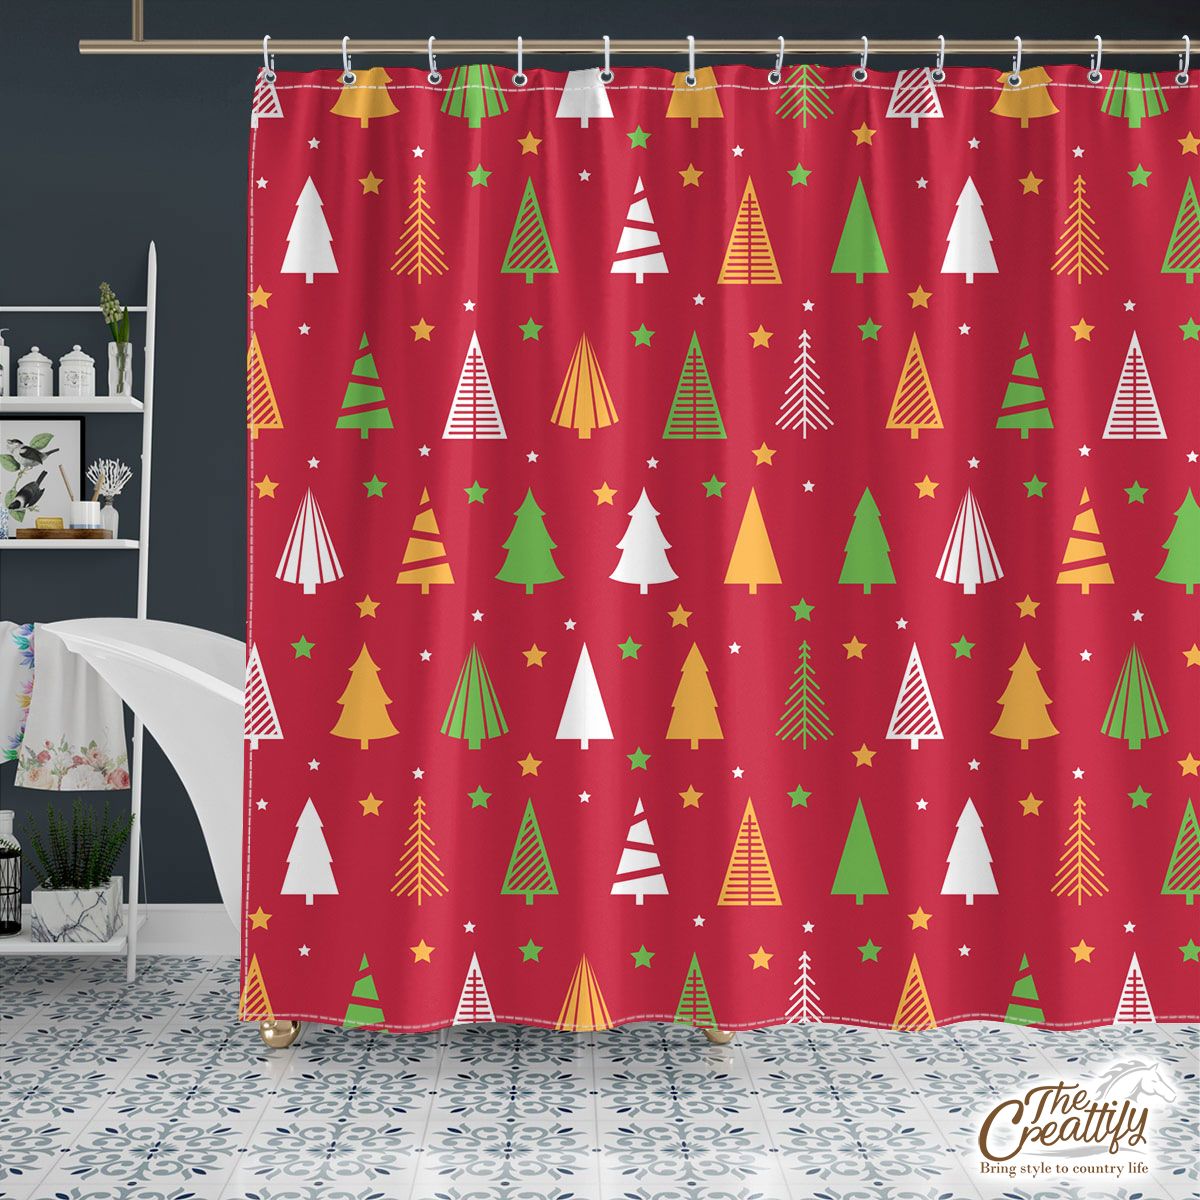 Red Green And White Christmas Tree With Star Shower Curtain